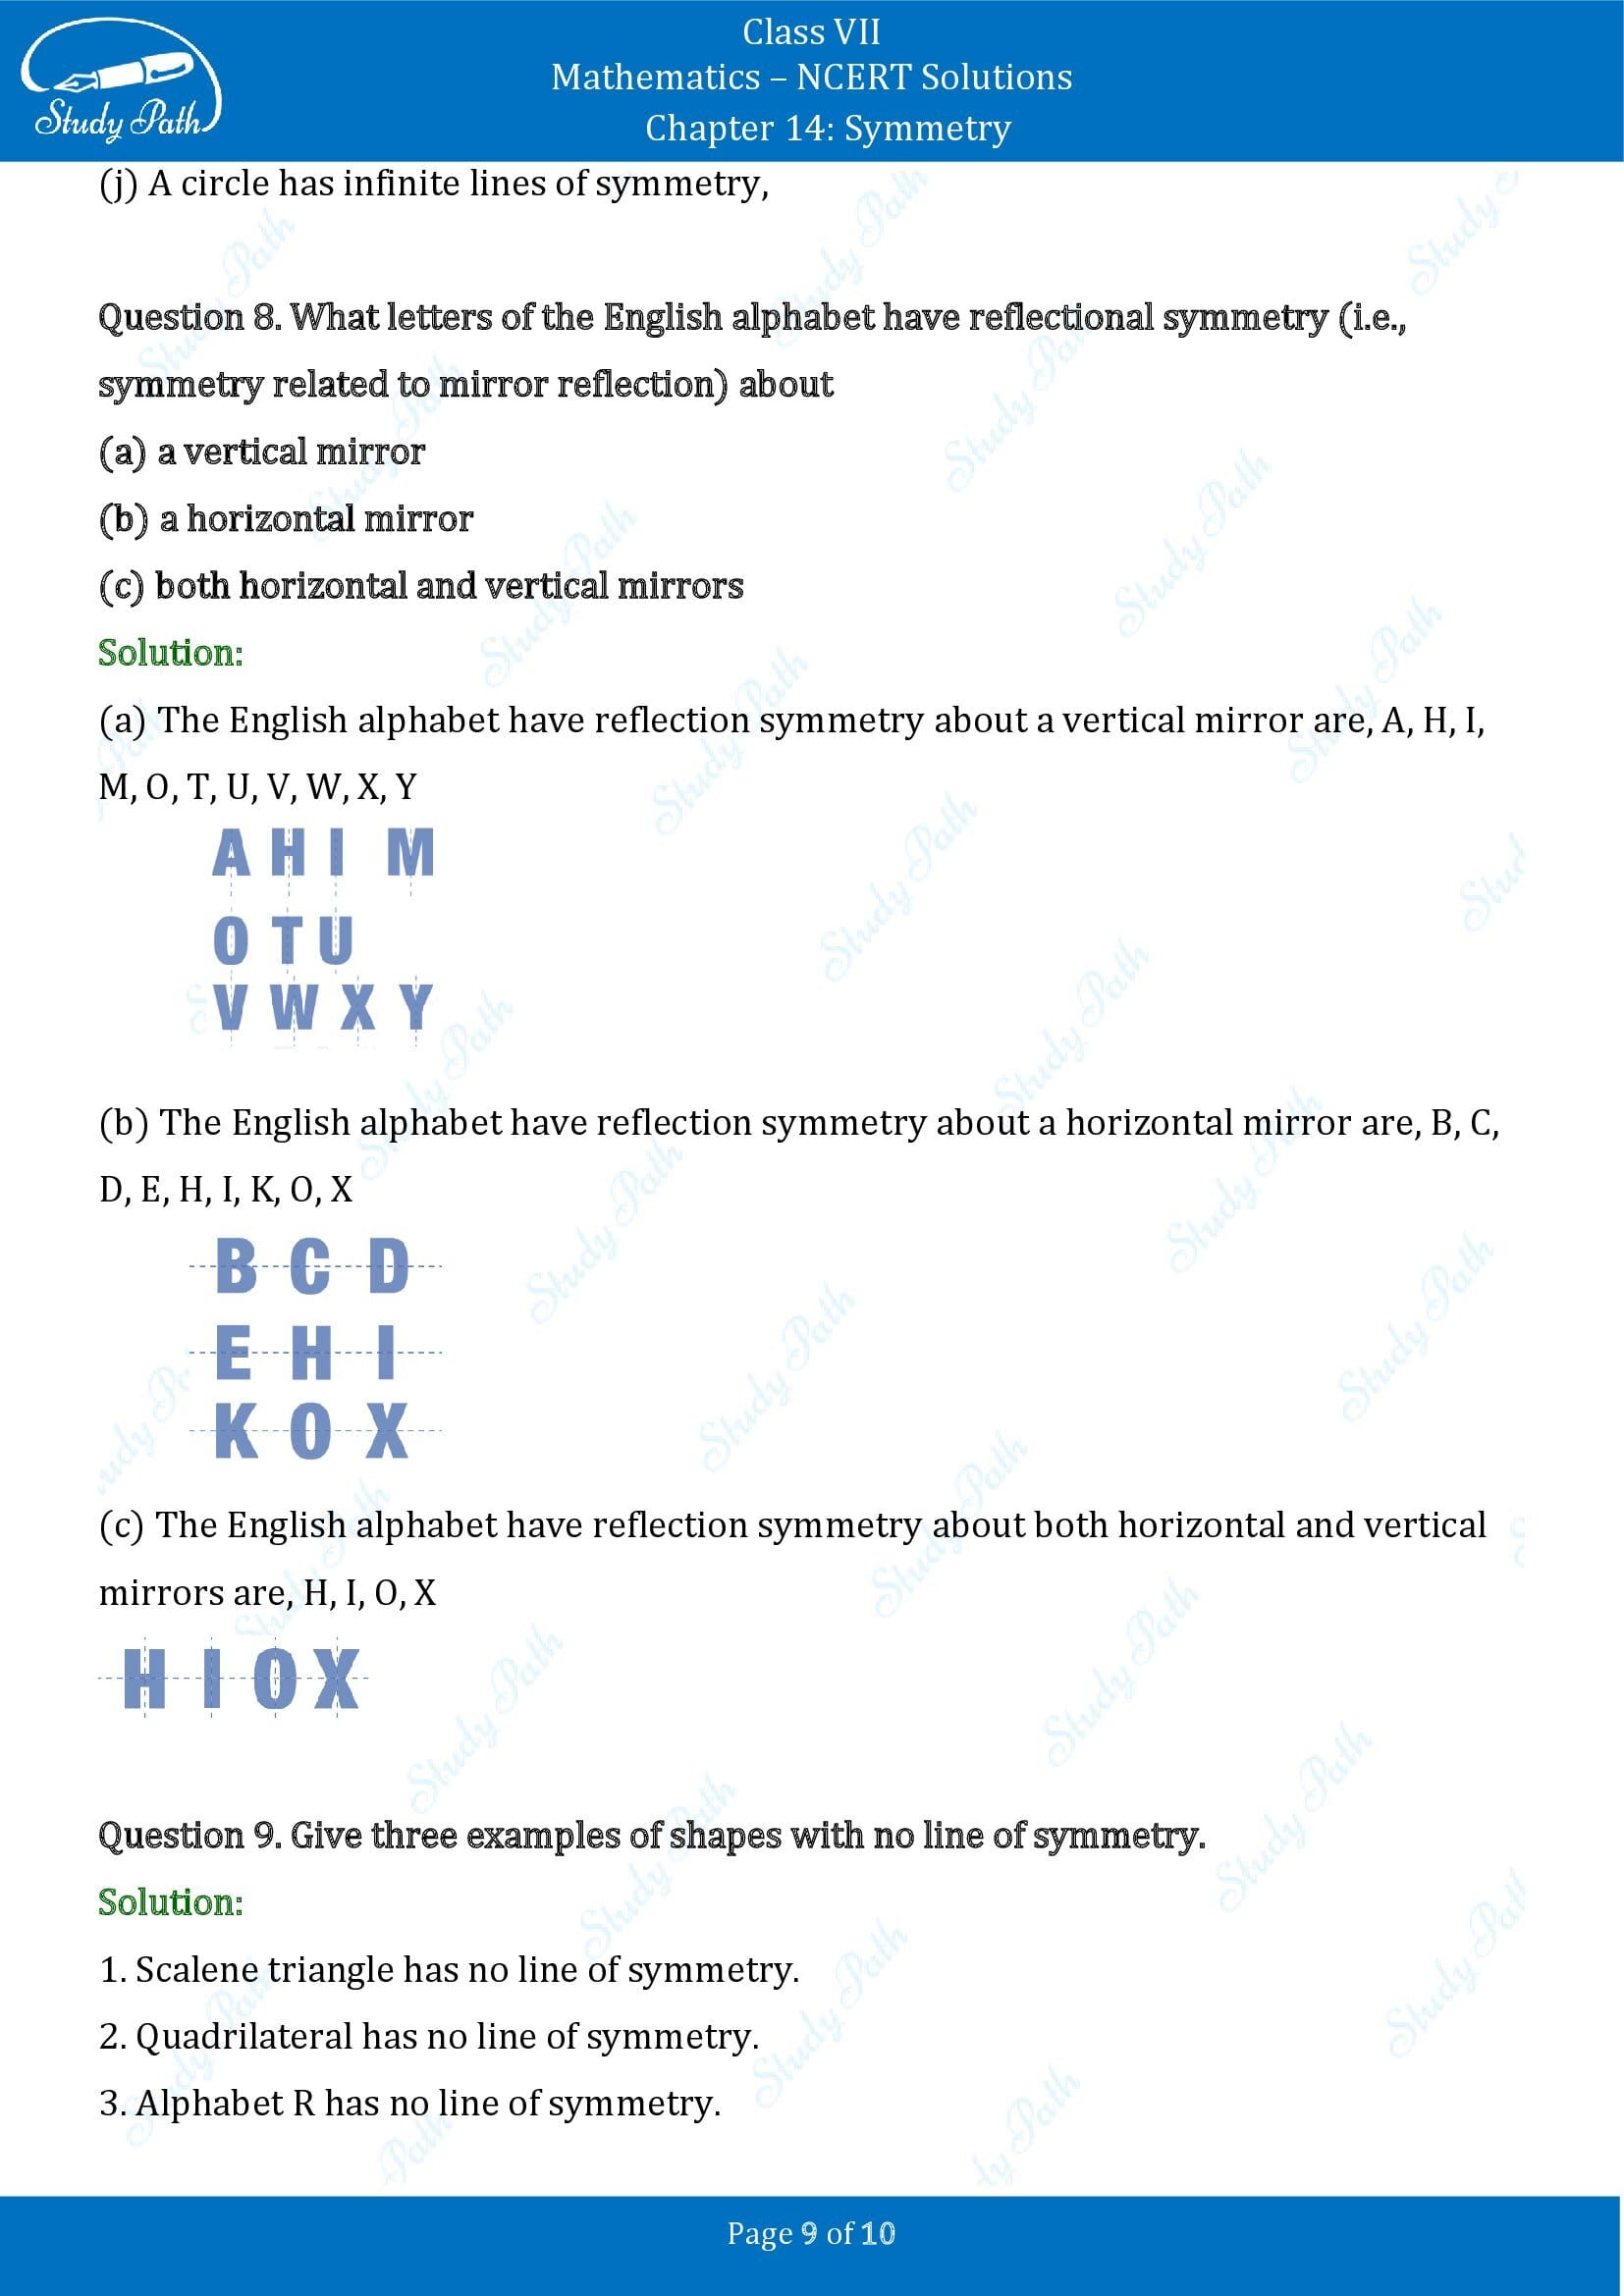 NCERT Solutions for Class 7 Maths Chapter 14 Symmetry Exercise 14.1 00009